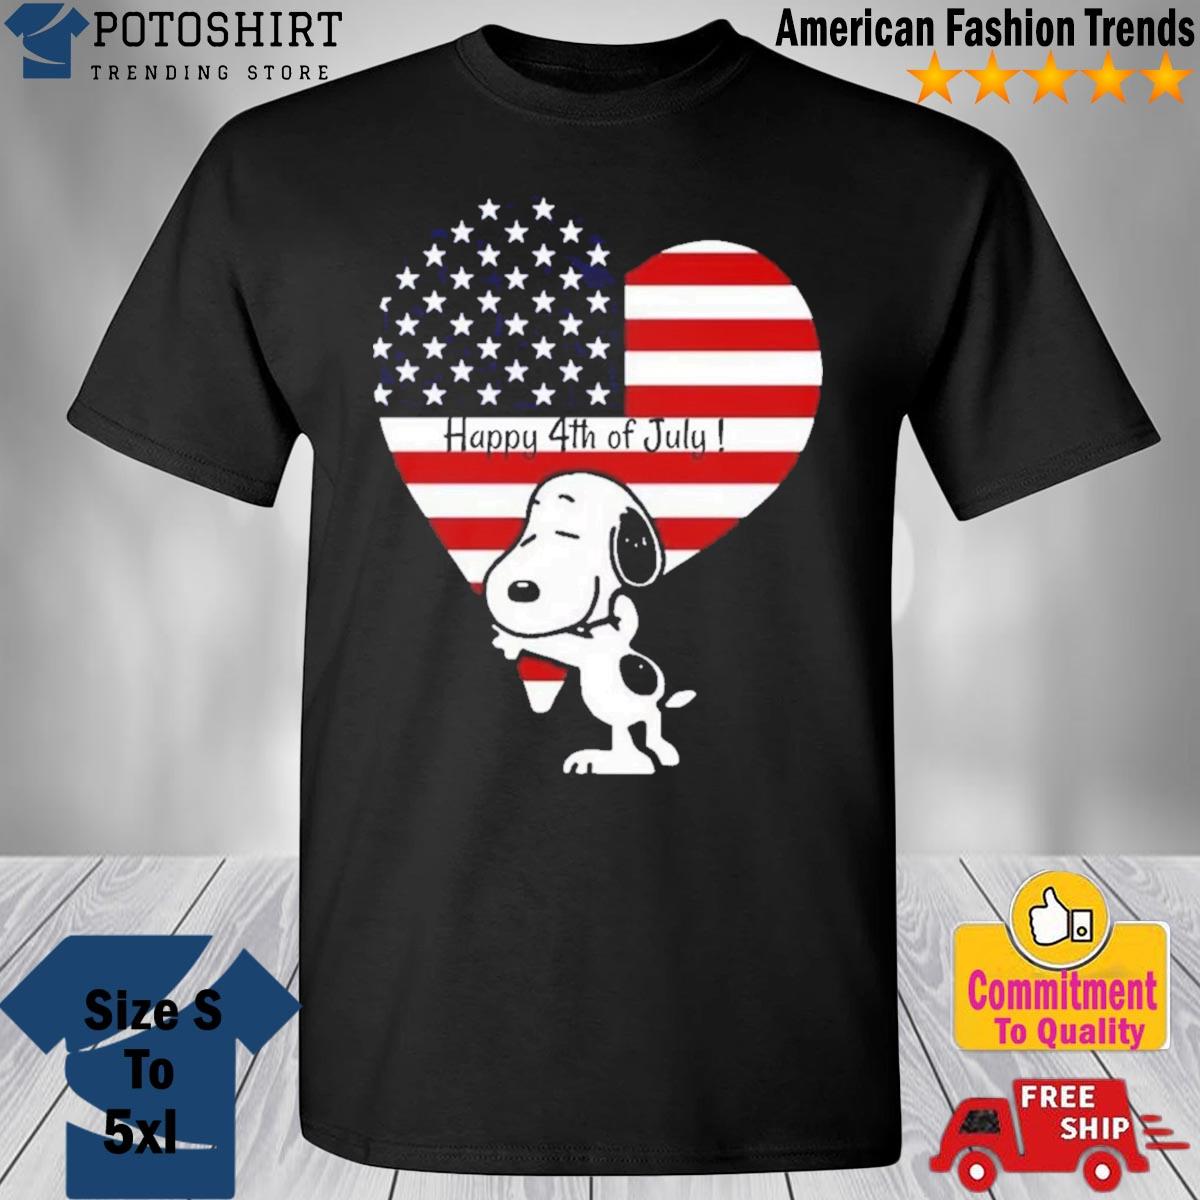 Pin by clayleen rivord on Snoopy happy 4th of july day shirt